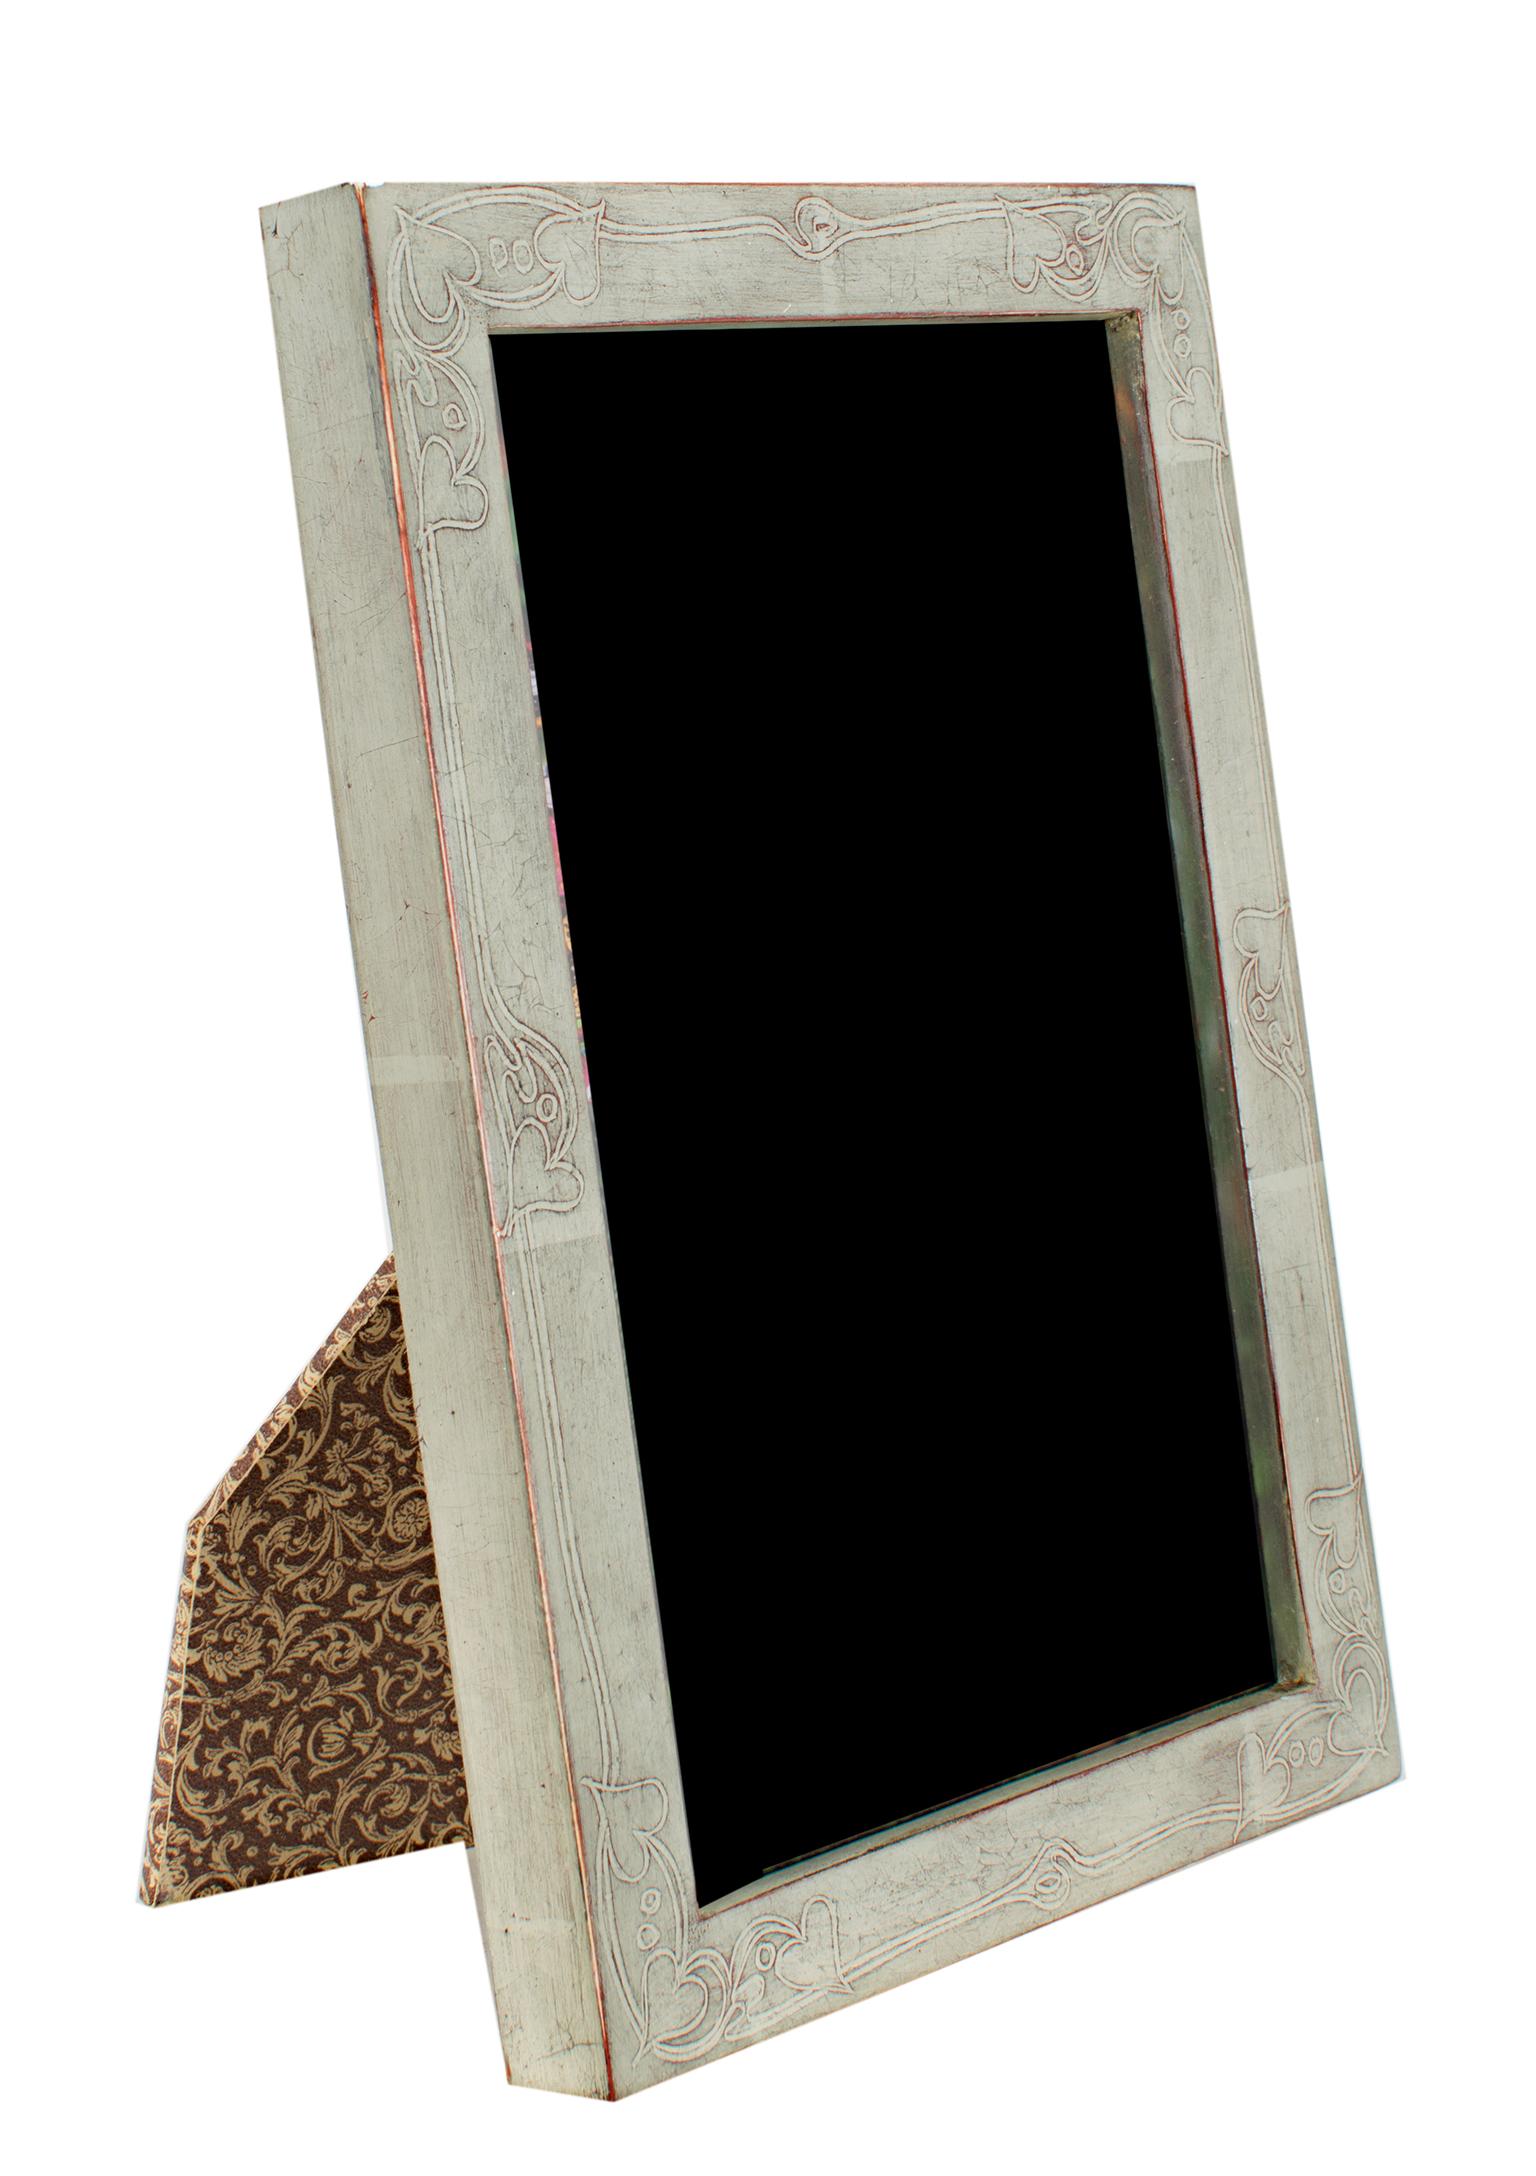 "Romanian Handmade Photo Frame, " 12K White Gold Leaf & Wood 4 x 6 in Frame - Art by Unknown